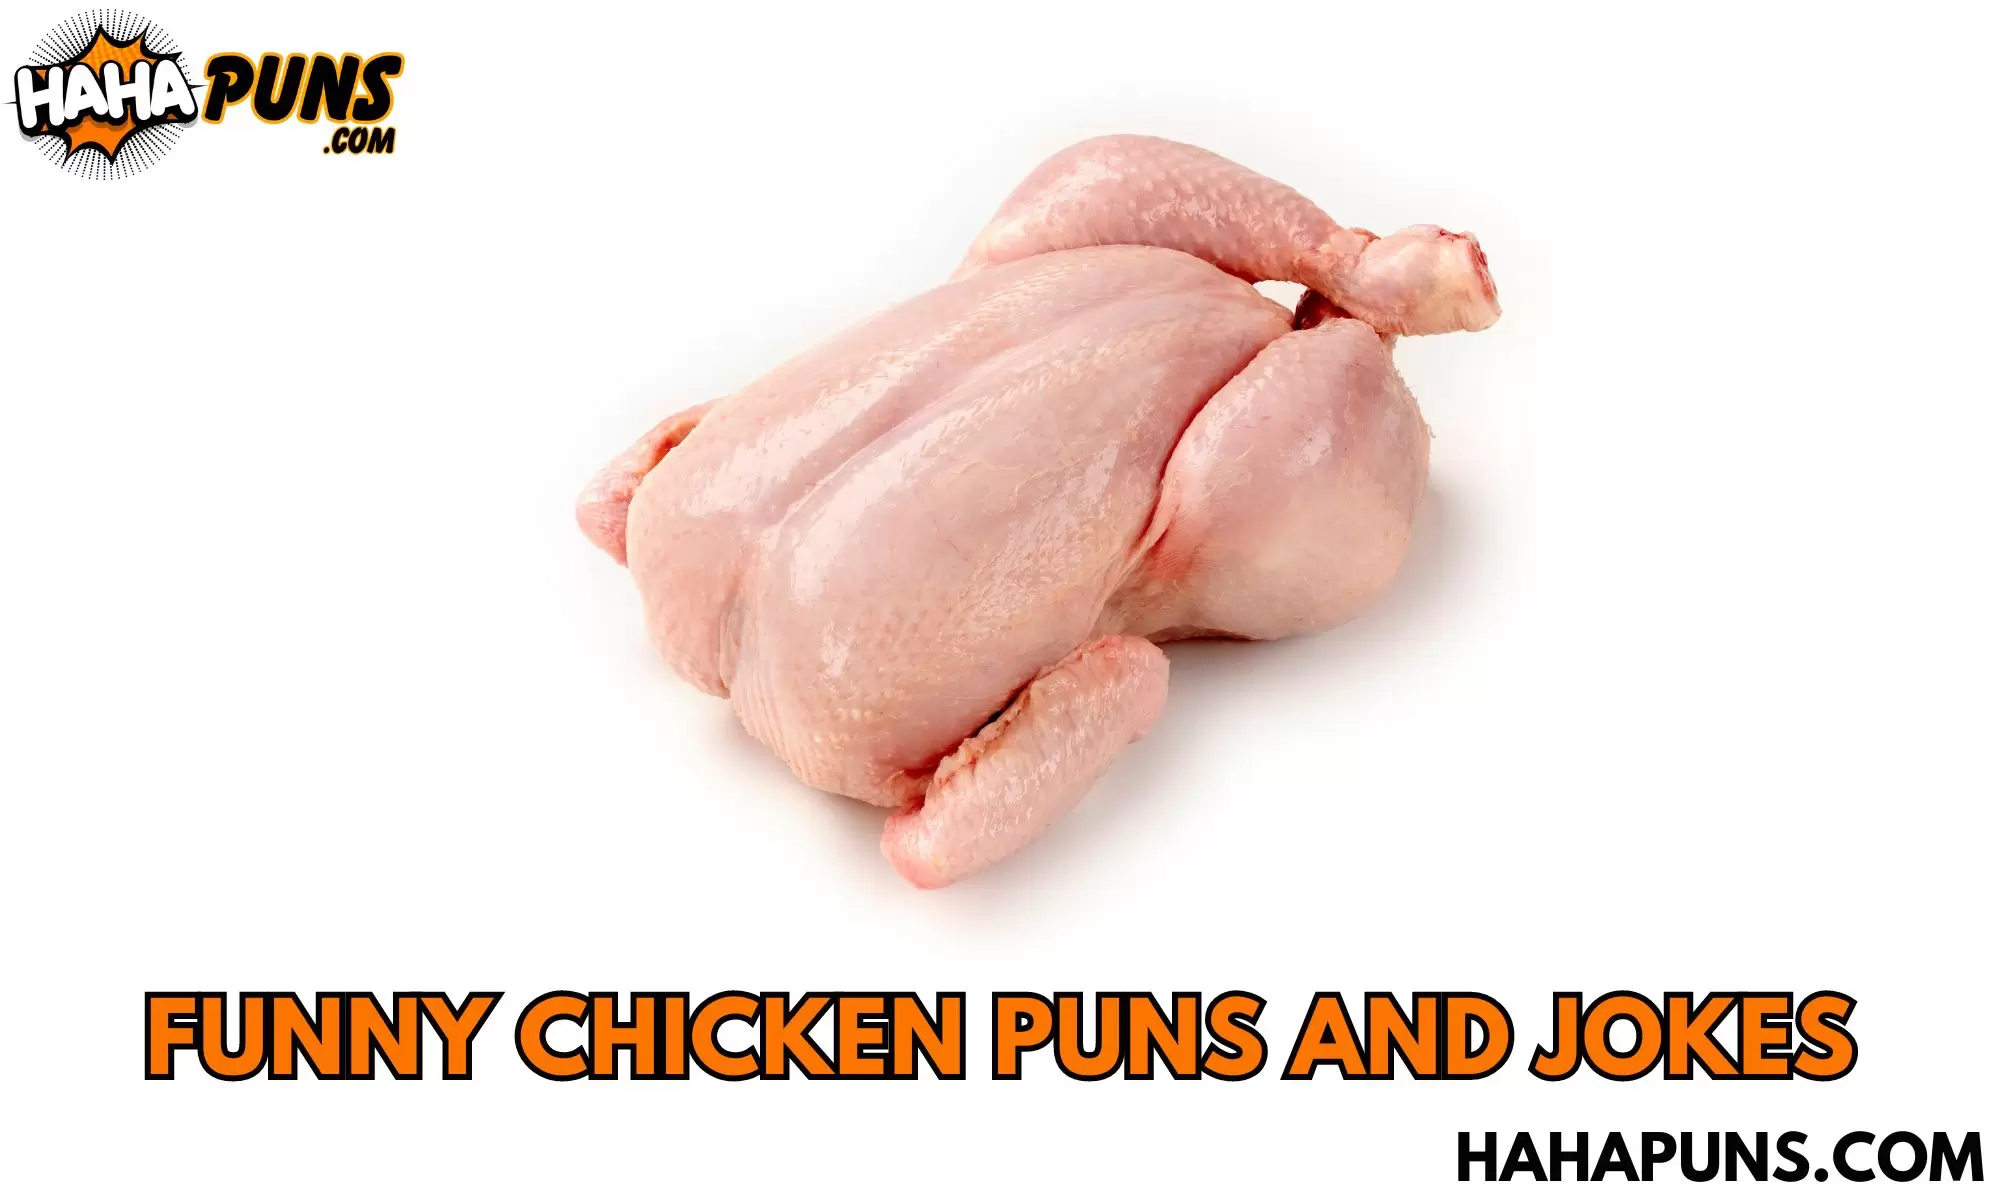 Funny Chicken Puns and Jokes